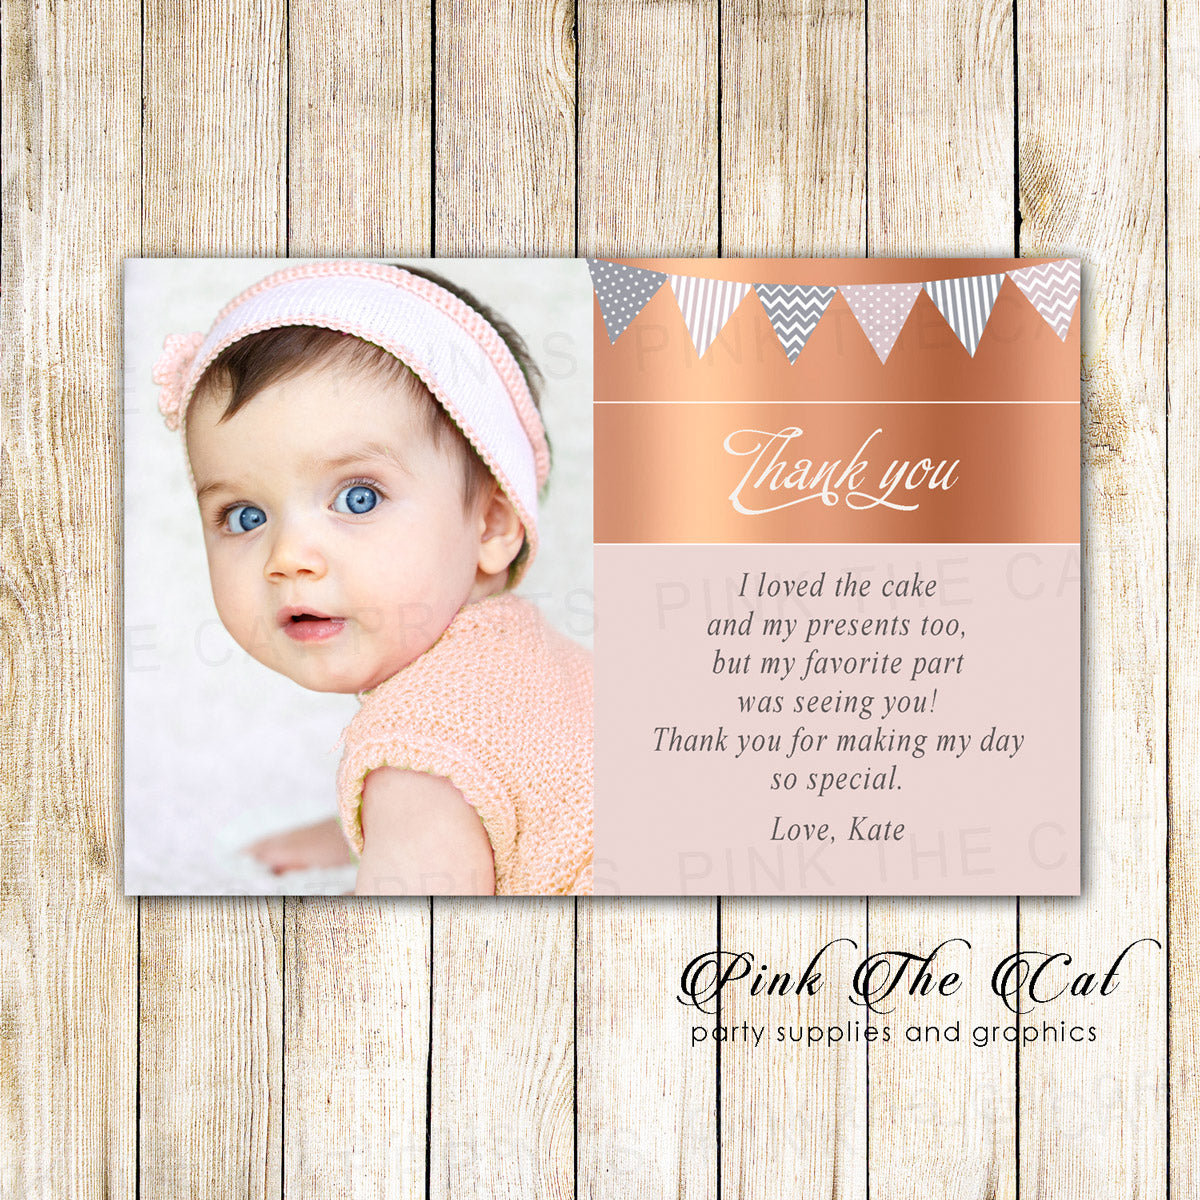 30 Thank you cards girl birthday rose gold silver with photo